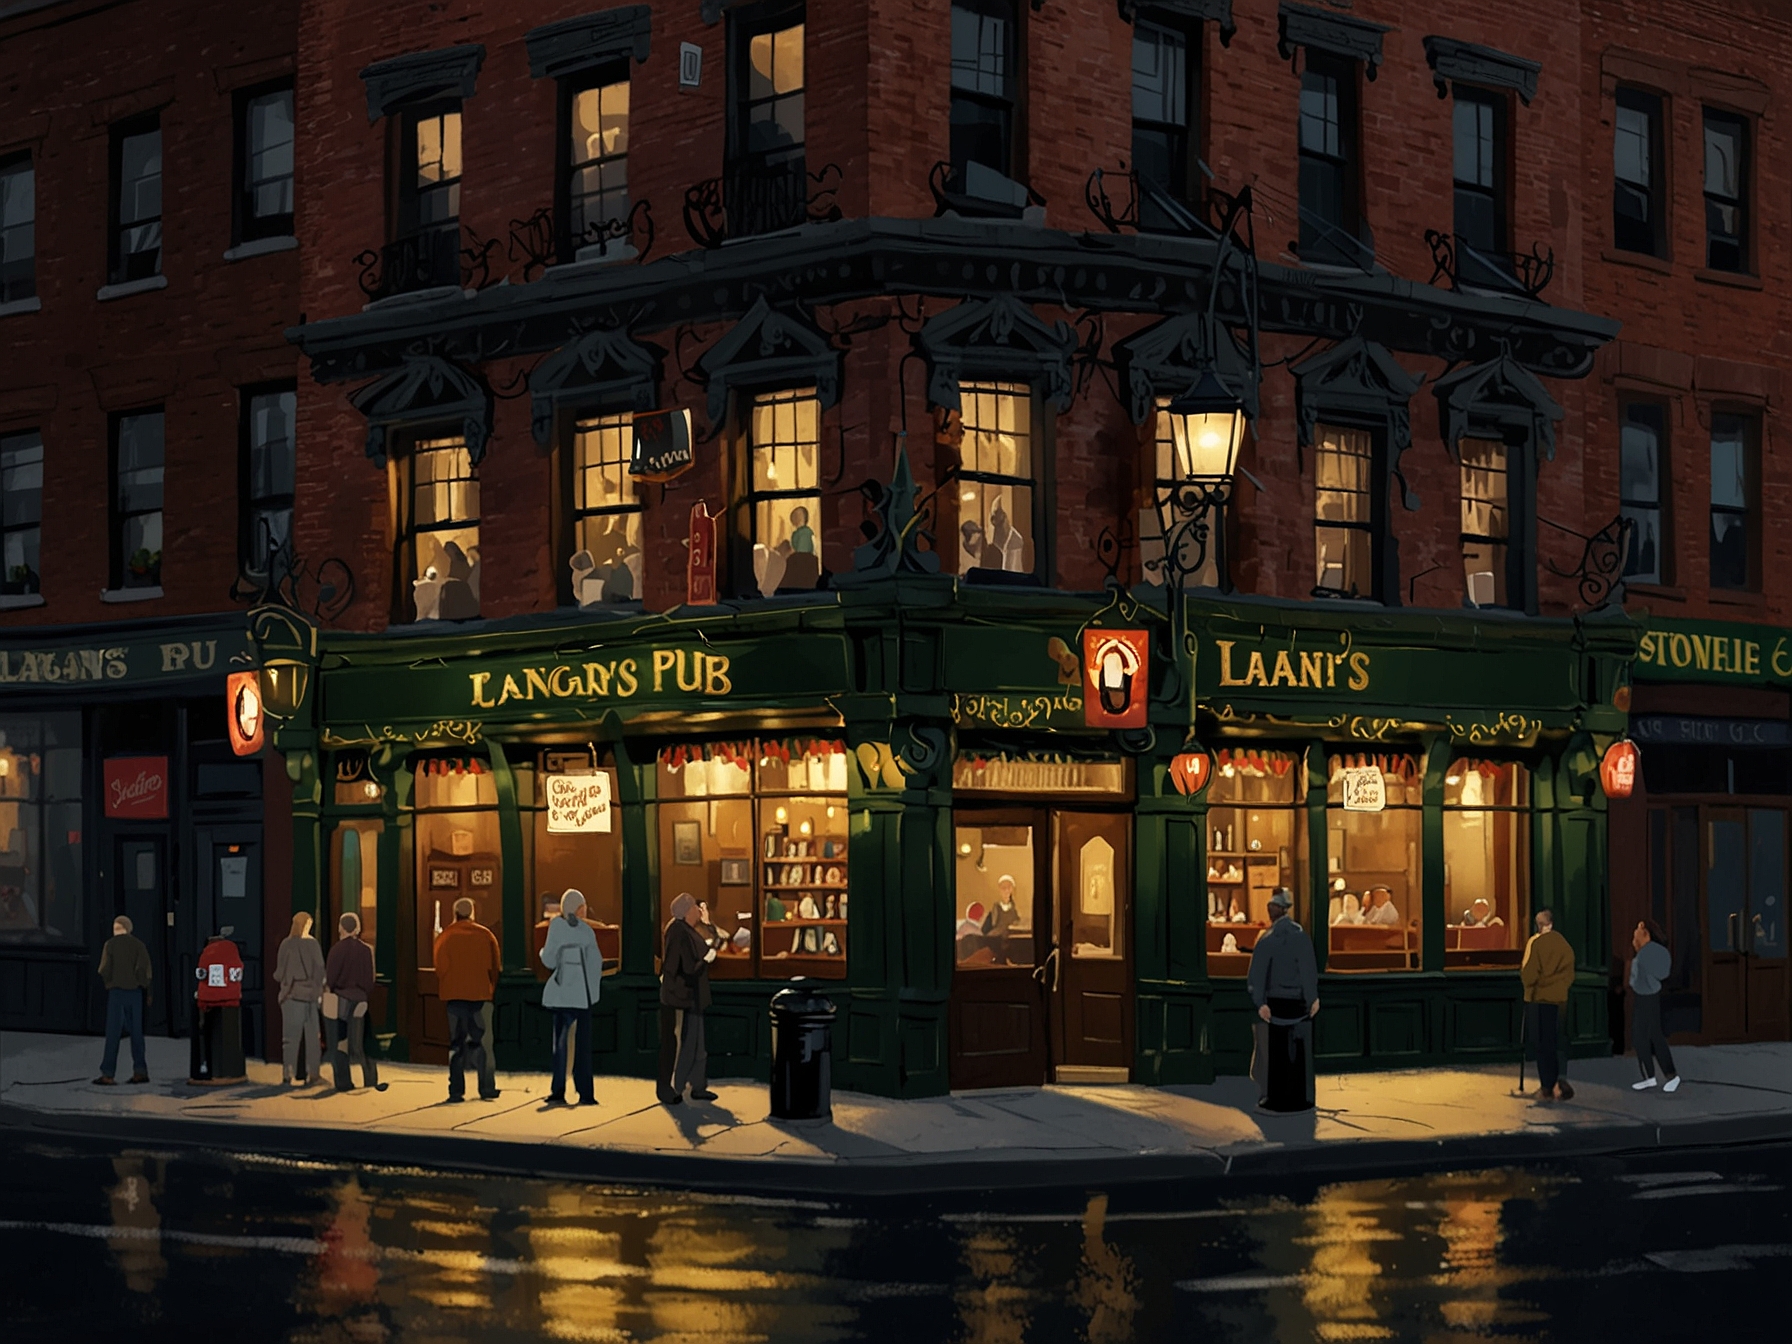 Image of the iconic Langan's pub with its traditional Irish facade on West 47th Street, bustling with patrons and featuring warm, inviting lights and classic pub signage.